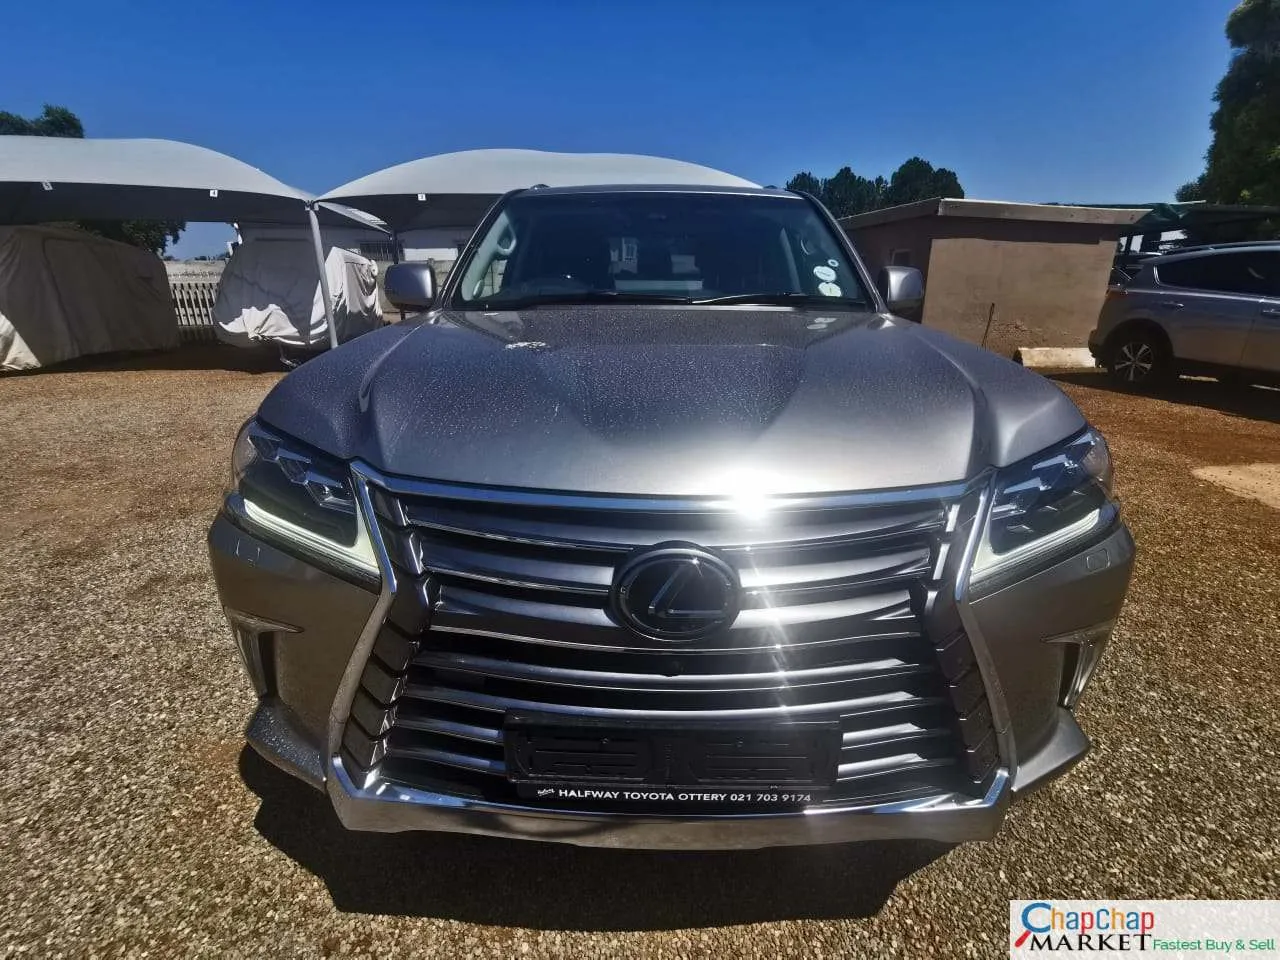 LEXUS LX 450D 450 D 🔥 🔥 Just Arrived Fully Loaded EXCLUSIVE!